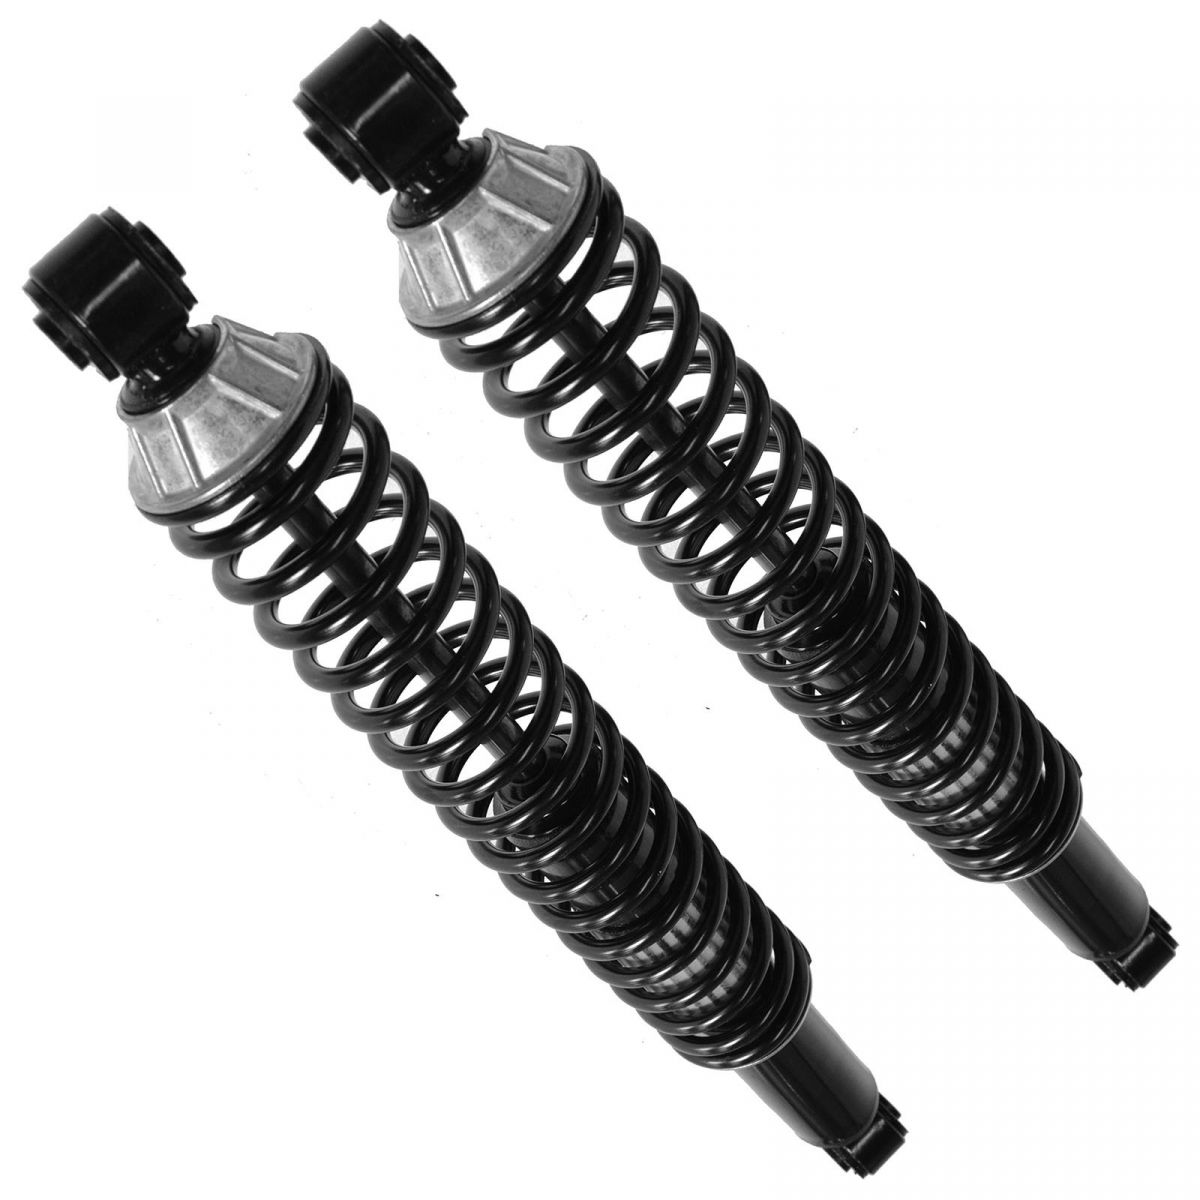 MONROE Shock Absorbers Load Adjusting Rear Pair Set for Chevy GMC